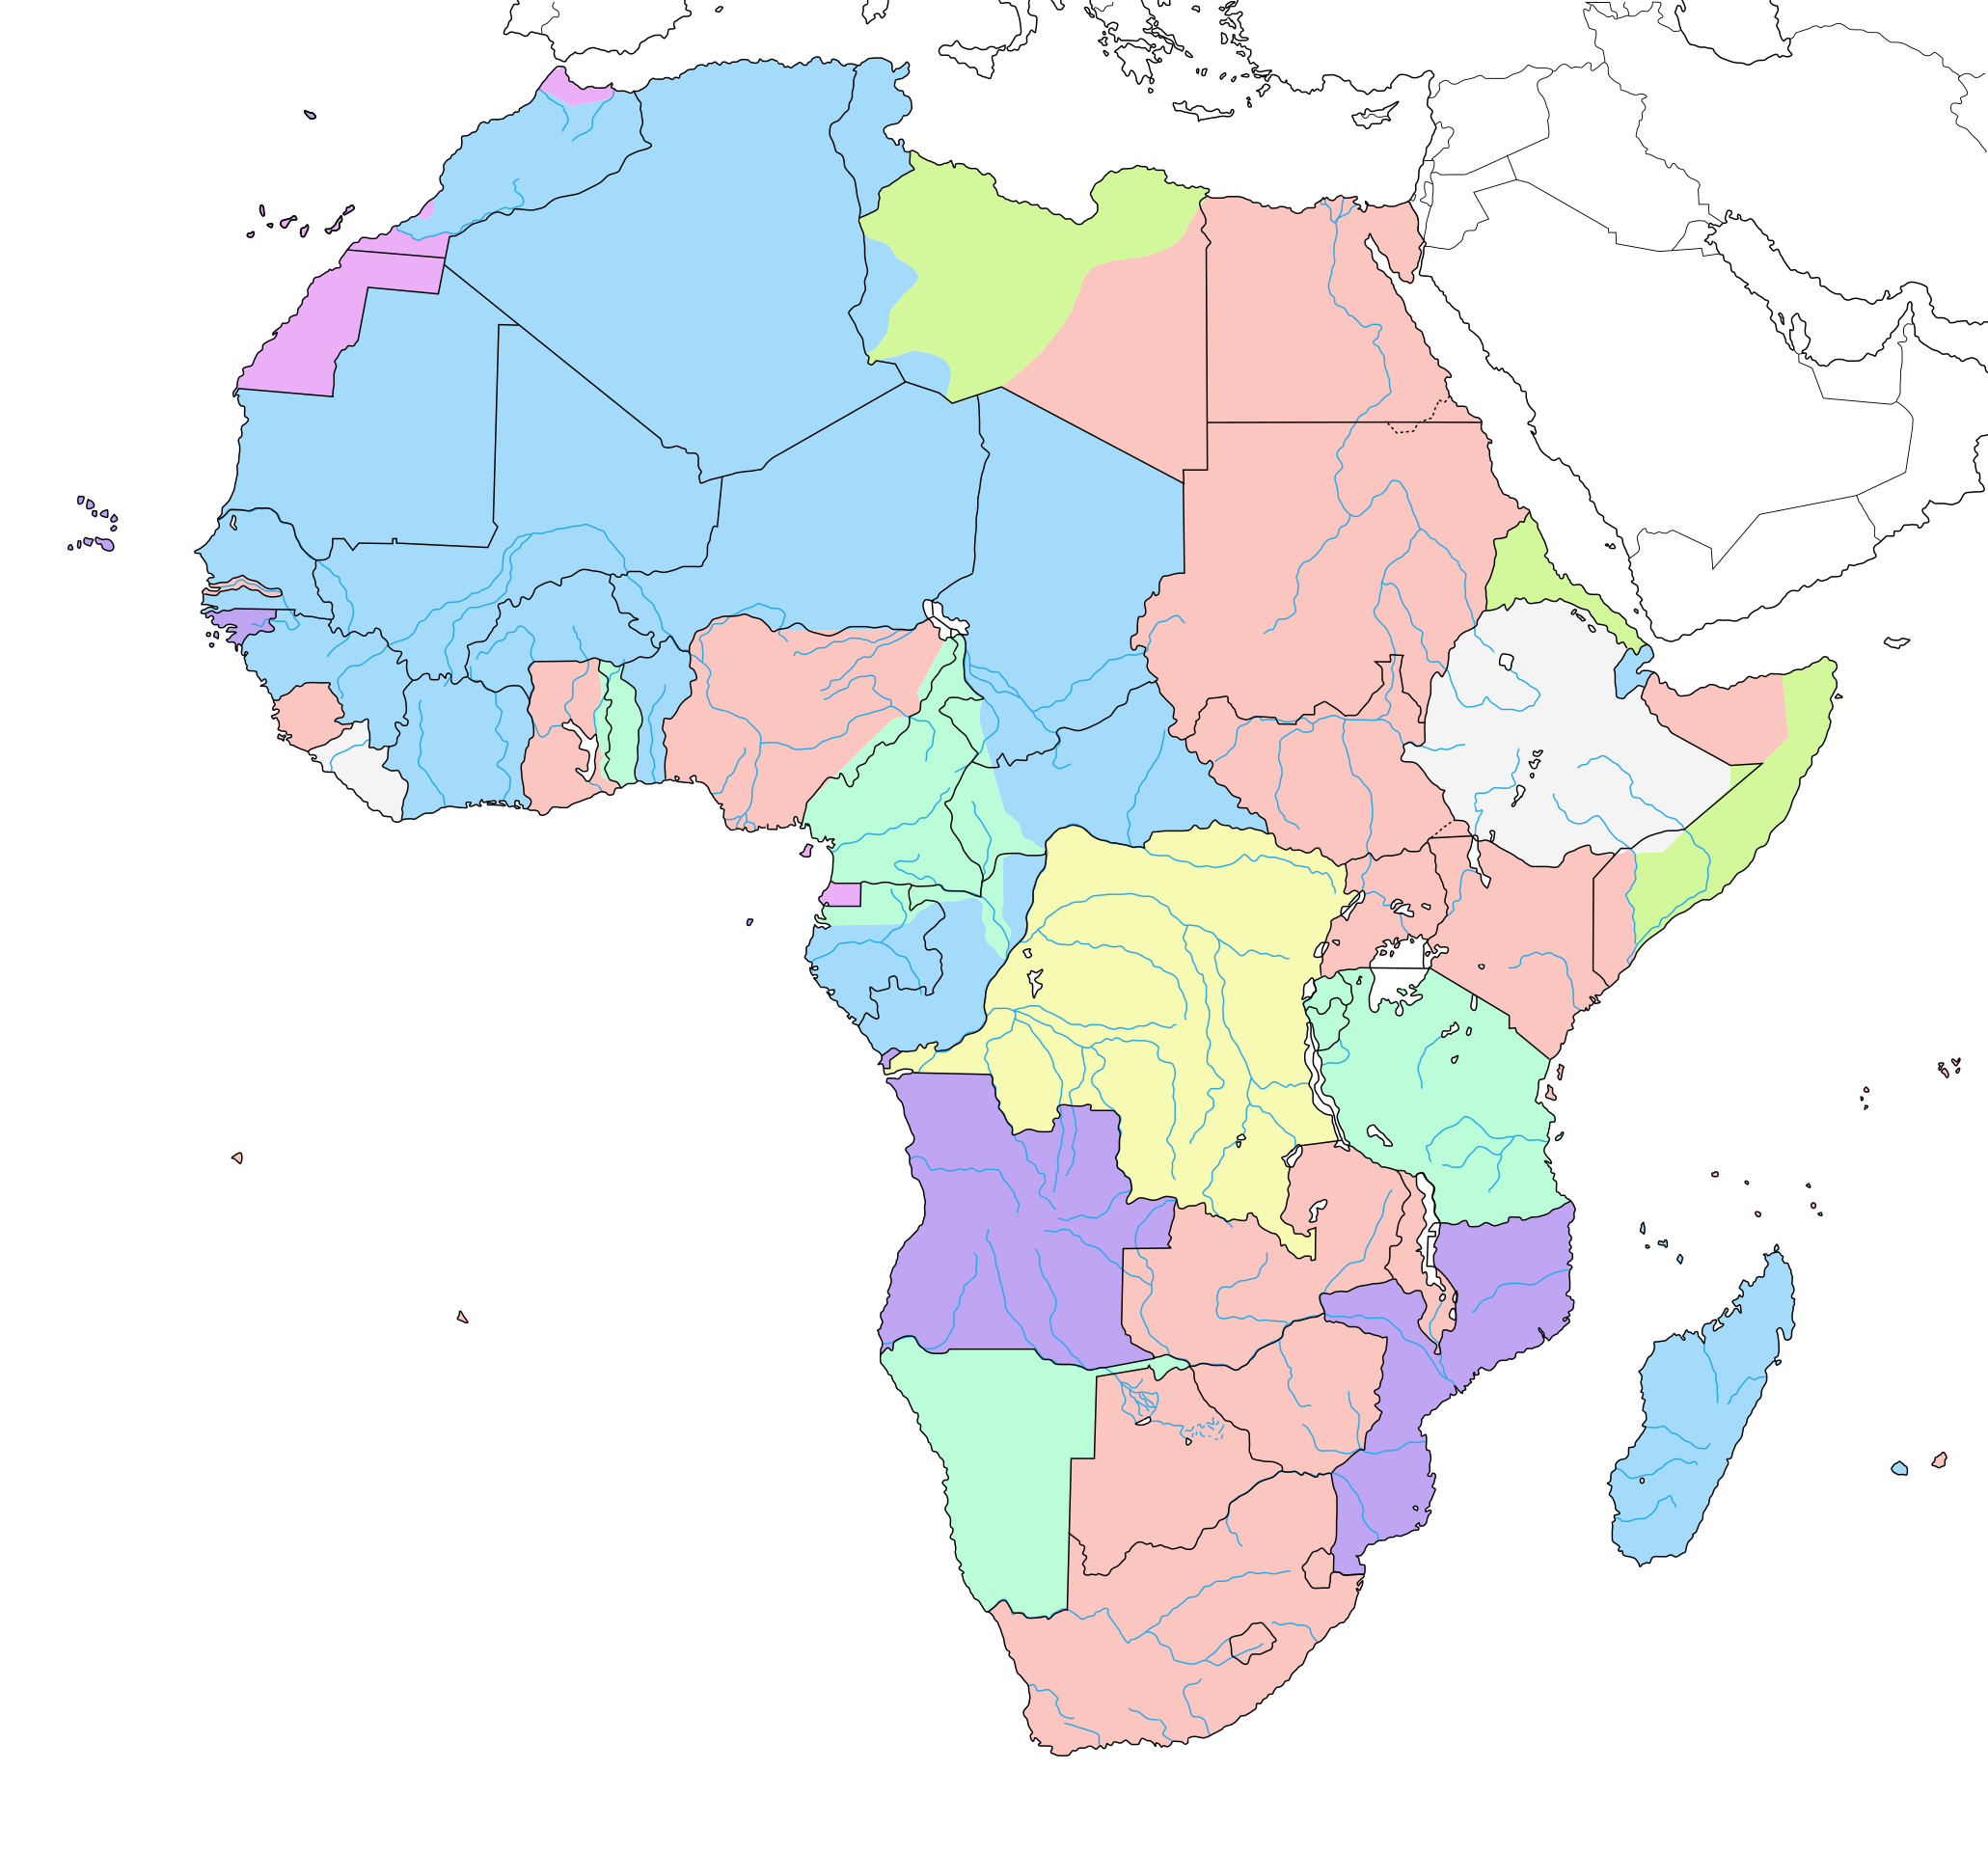 the scramble for Africa